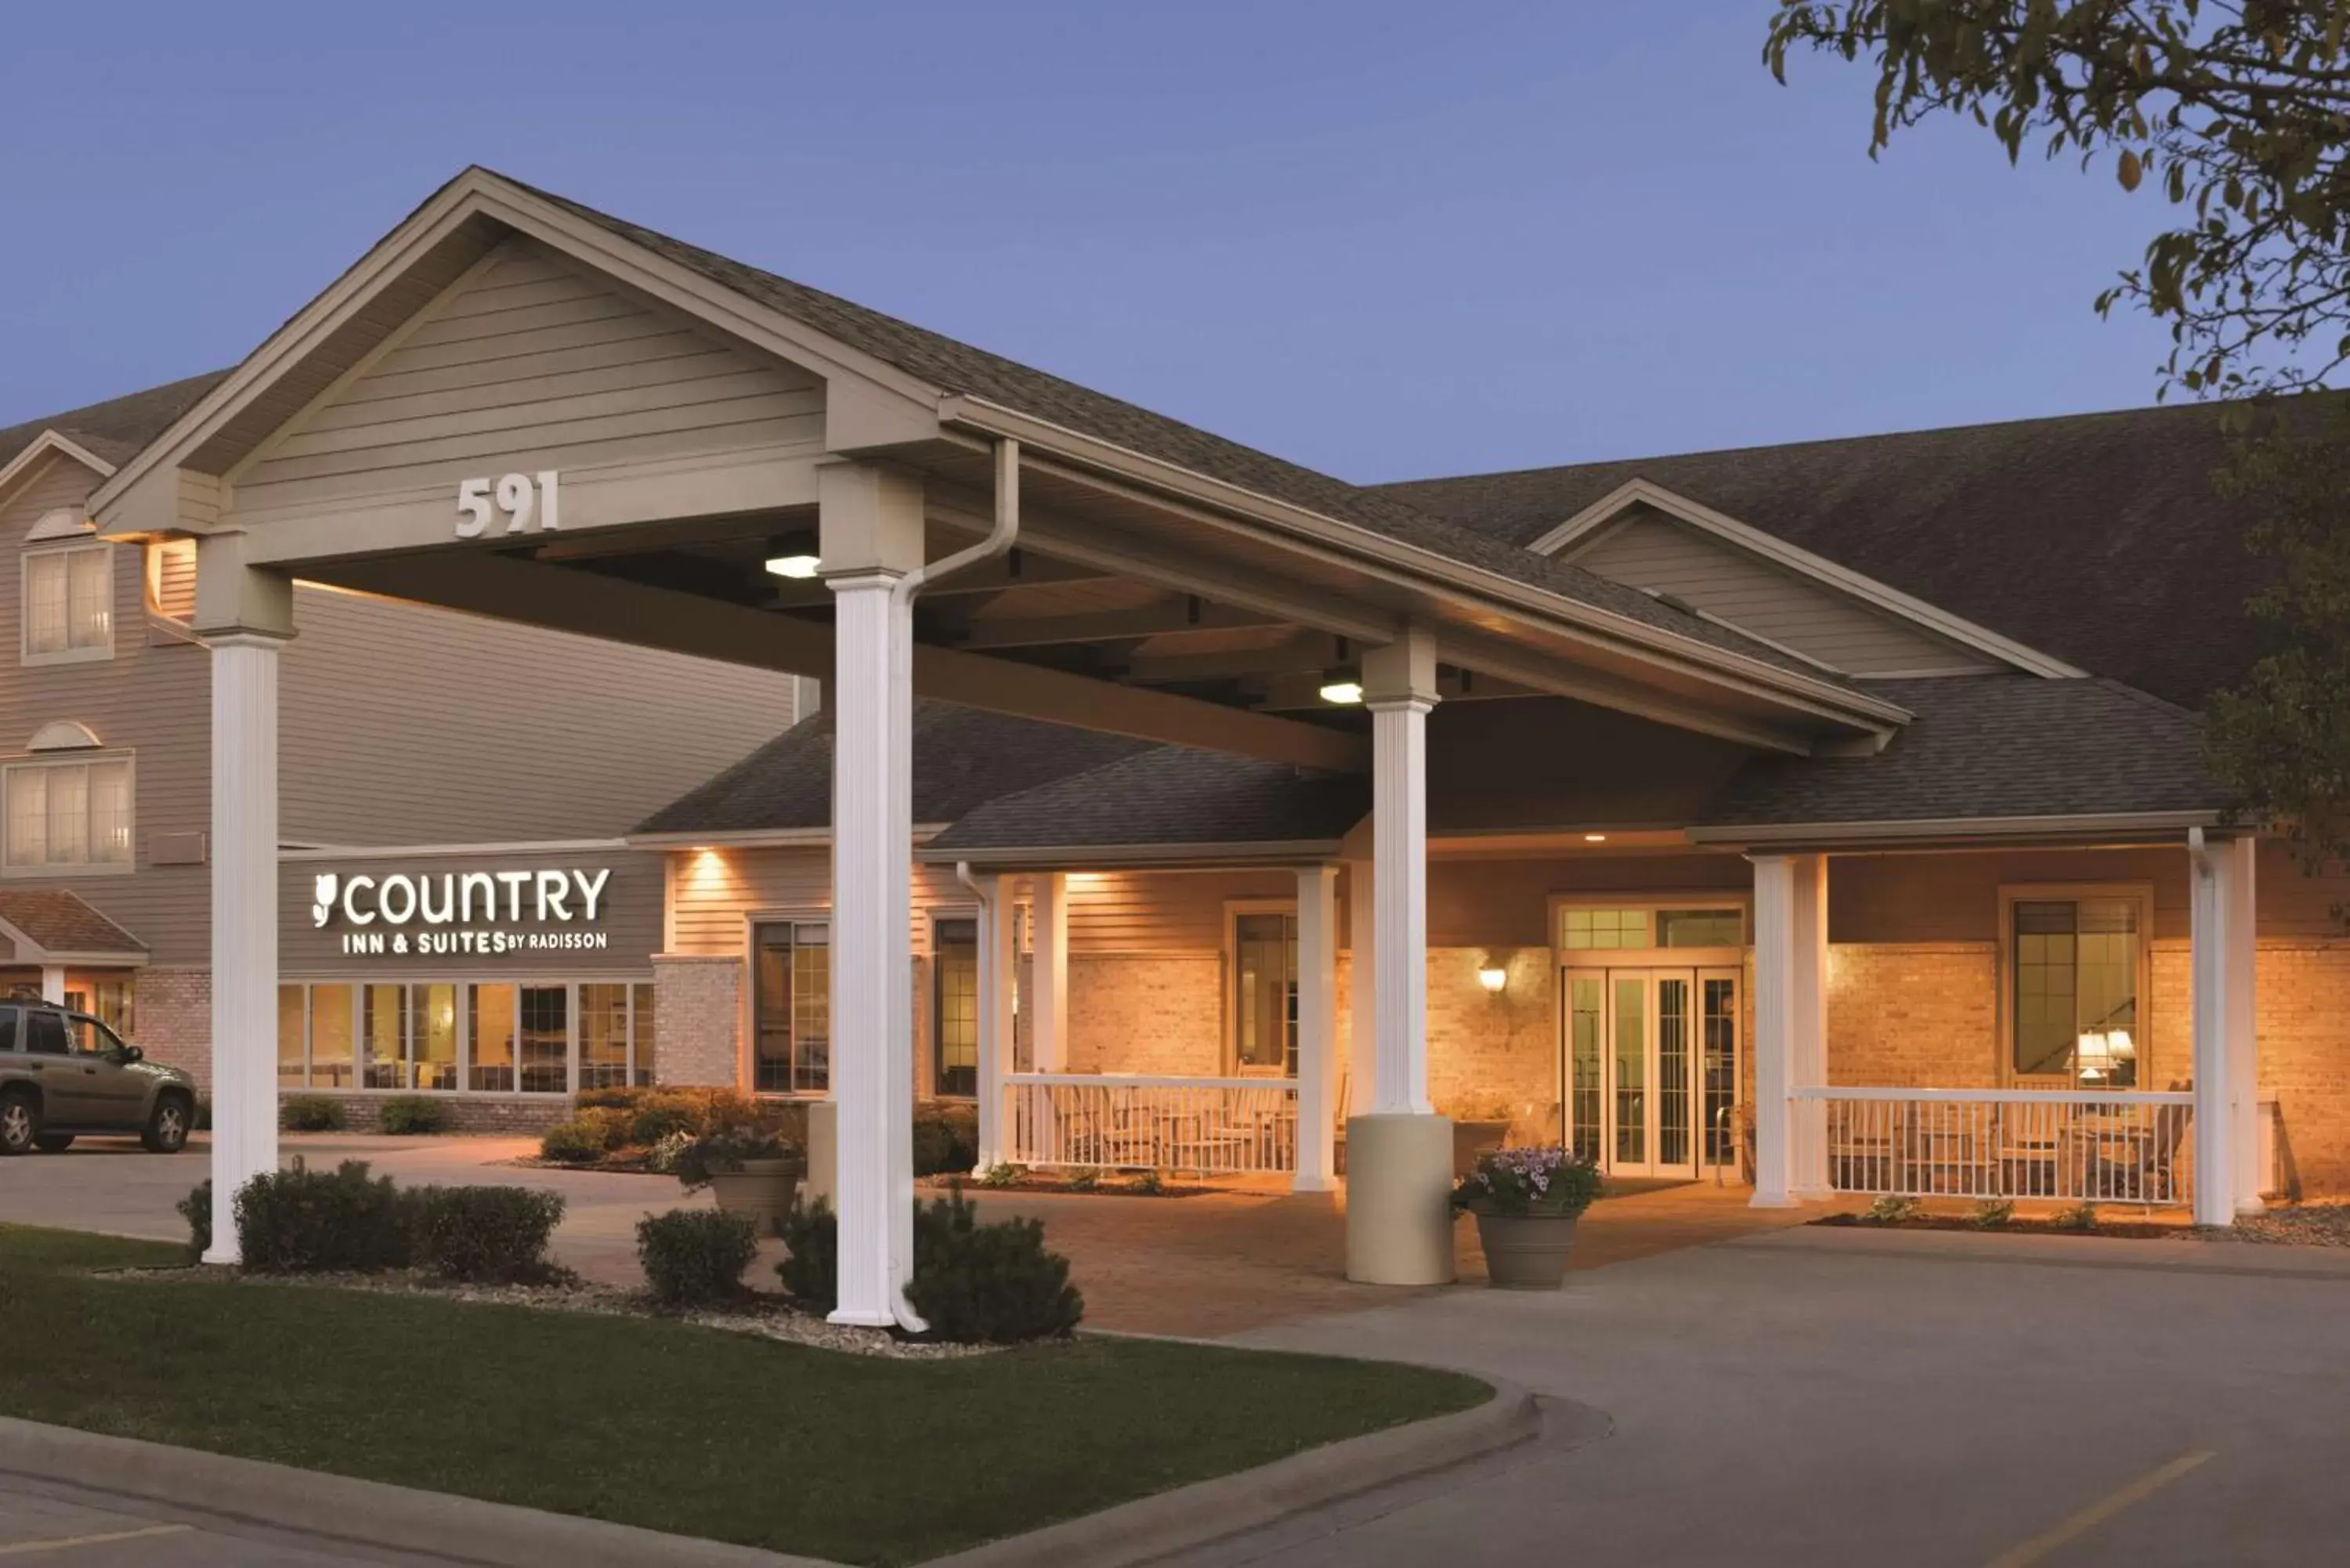 Property building in Country Inn & Suites by Radisson, Chanhassen, MN